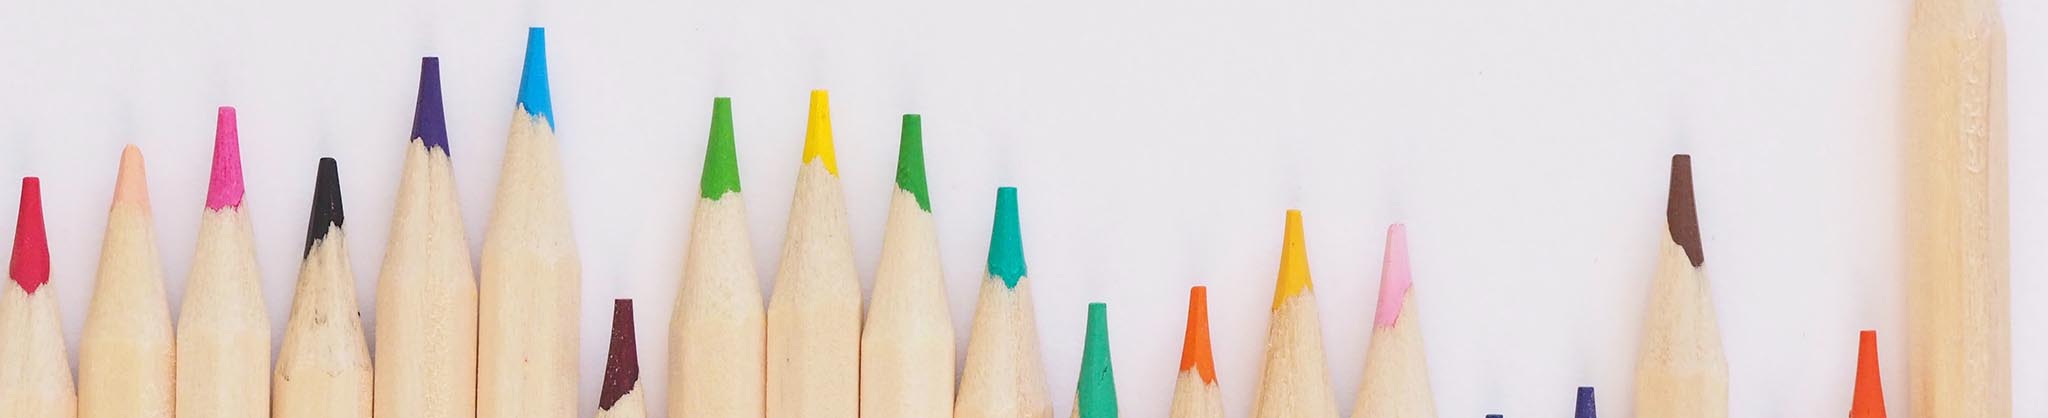 Multi-coloured pencils in an undulating row - Photo by Jess Bailey on Unsplash